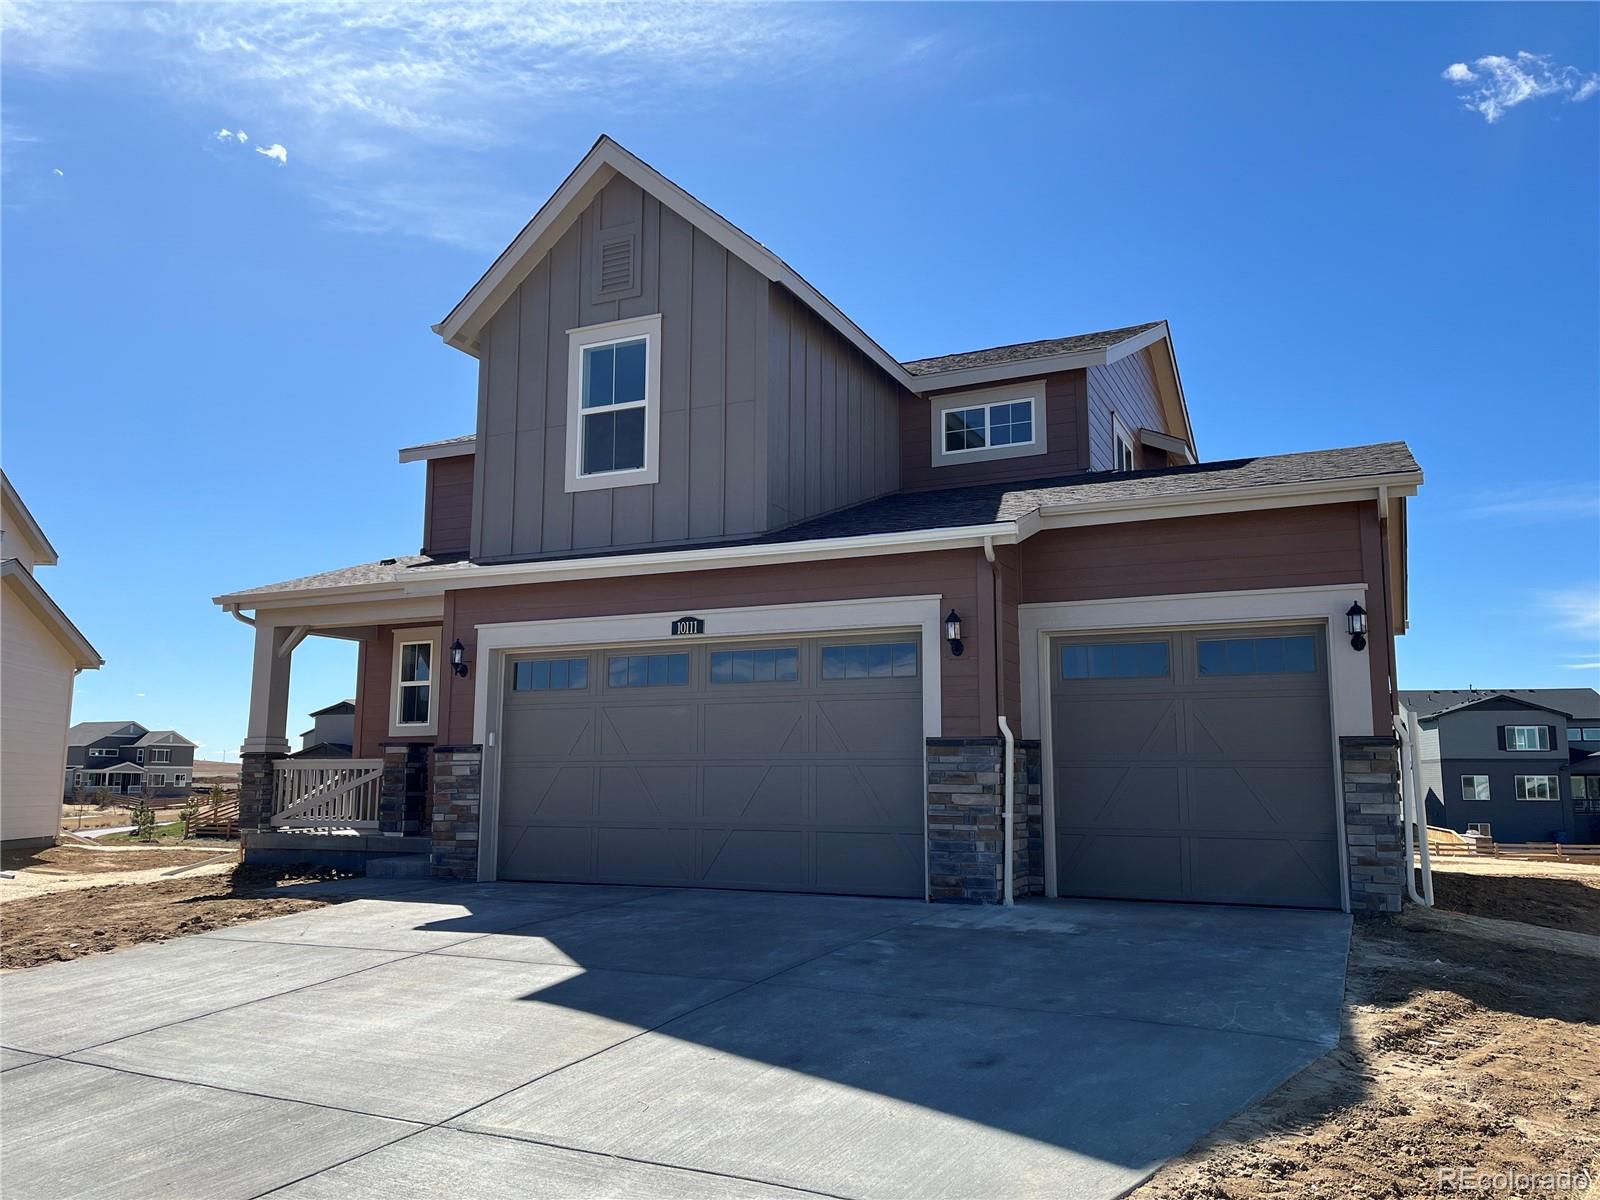 10111  wheeling street, Commerce City sold home. Closed on 2024-04-25 for $562,500.